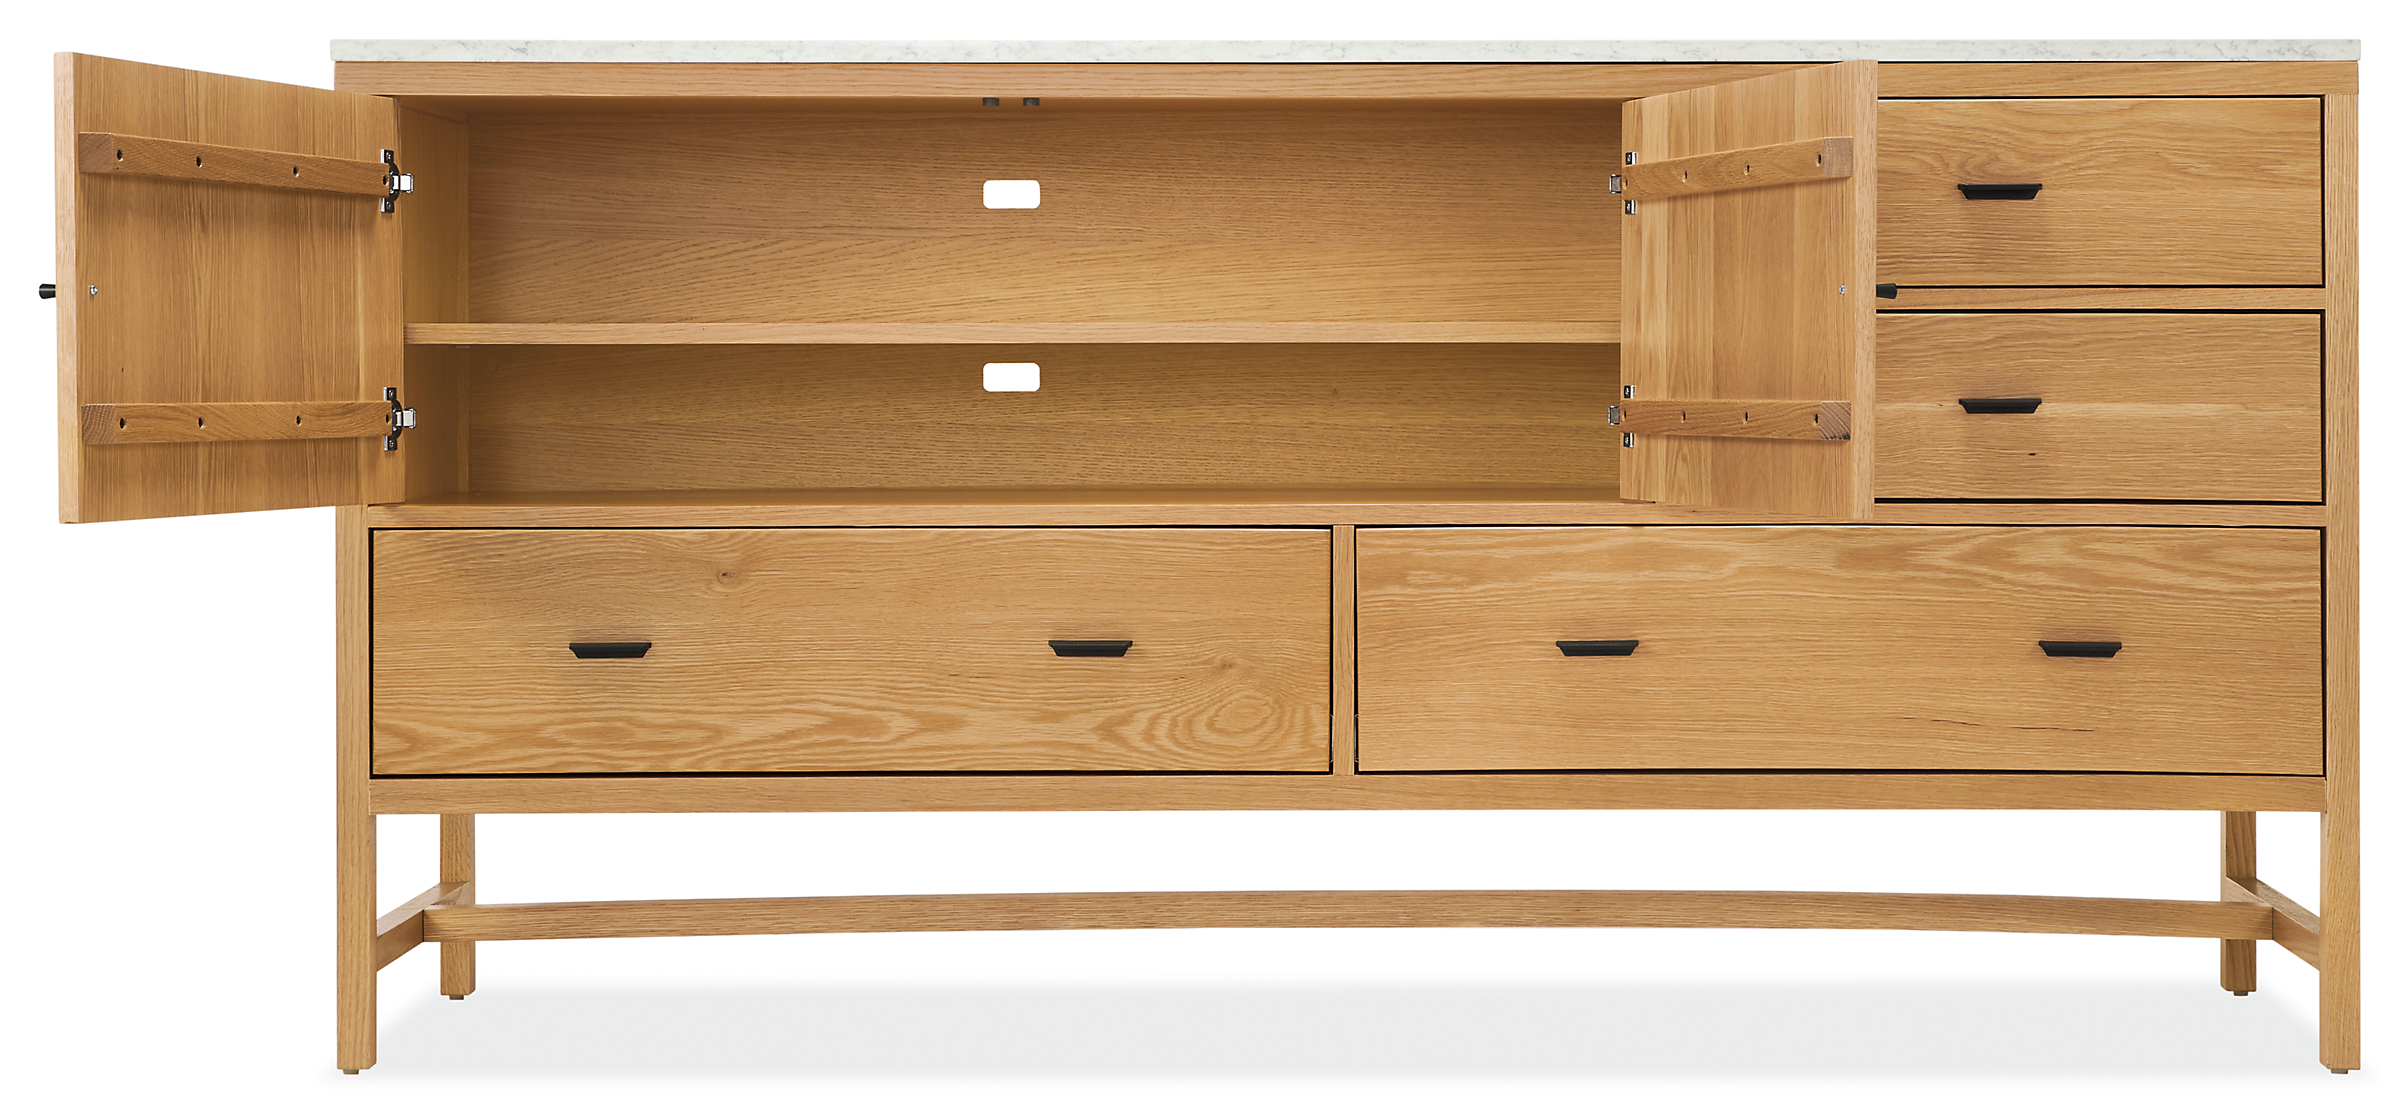 Detail of Berkeley 72-wide storage cabinet in white oak with open doors showing cord management holes and shelf.